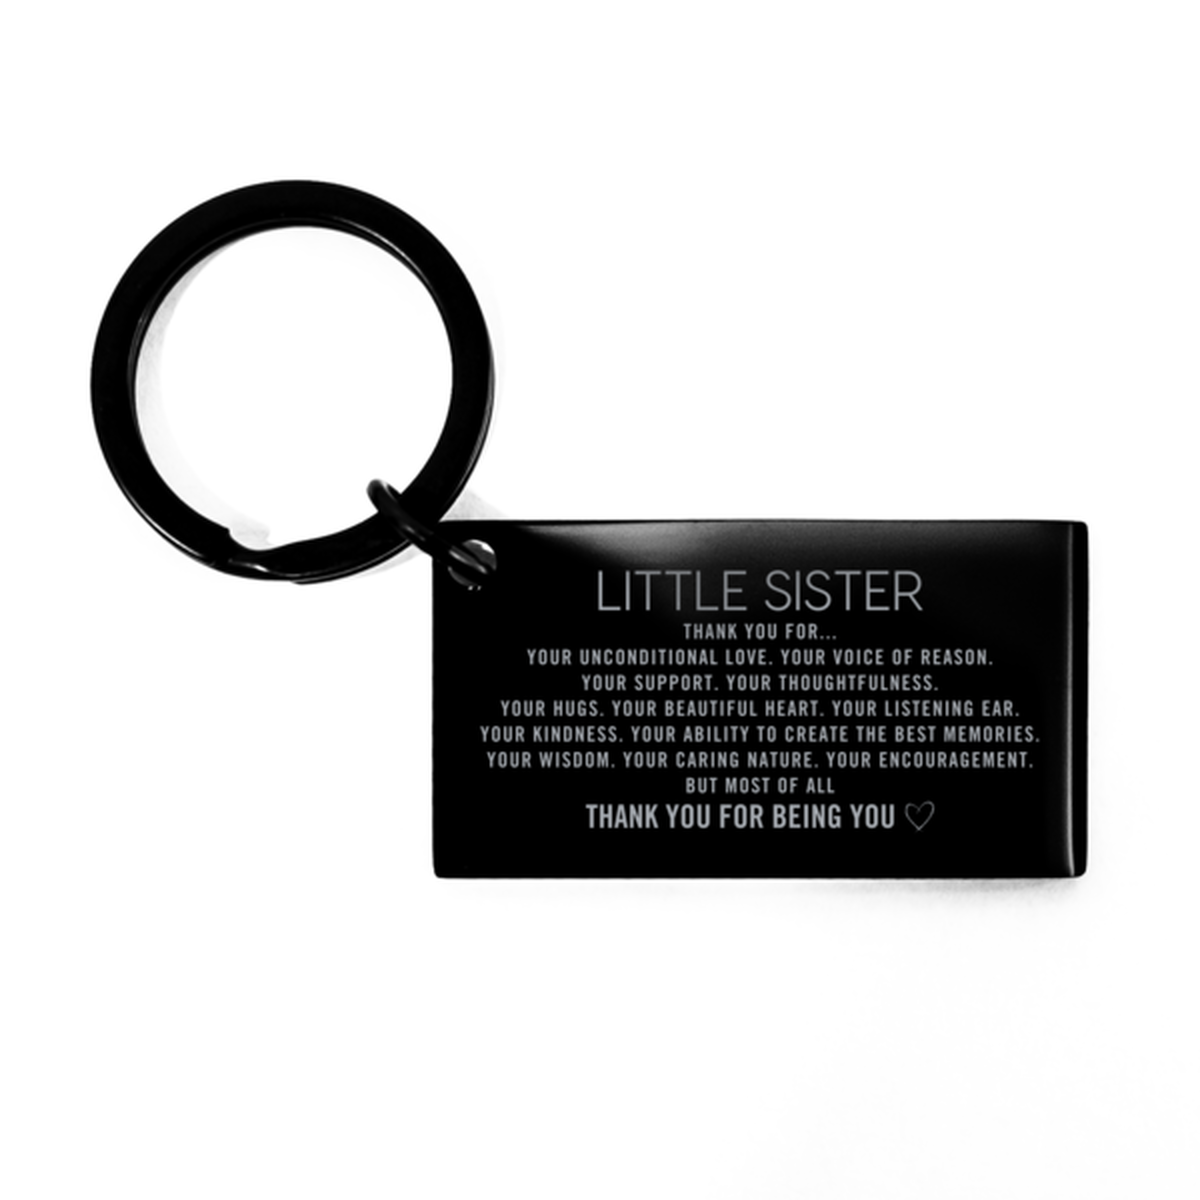 Little Sister Keychain Custom, Engraved Gifts For Little Sister Christmas Graduation Birthday Gifts for Men Women Little Sister Thank you for Your unconditional love